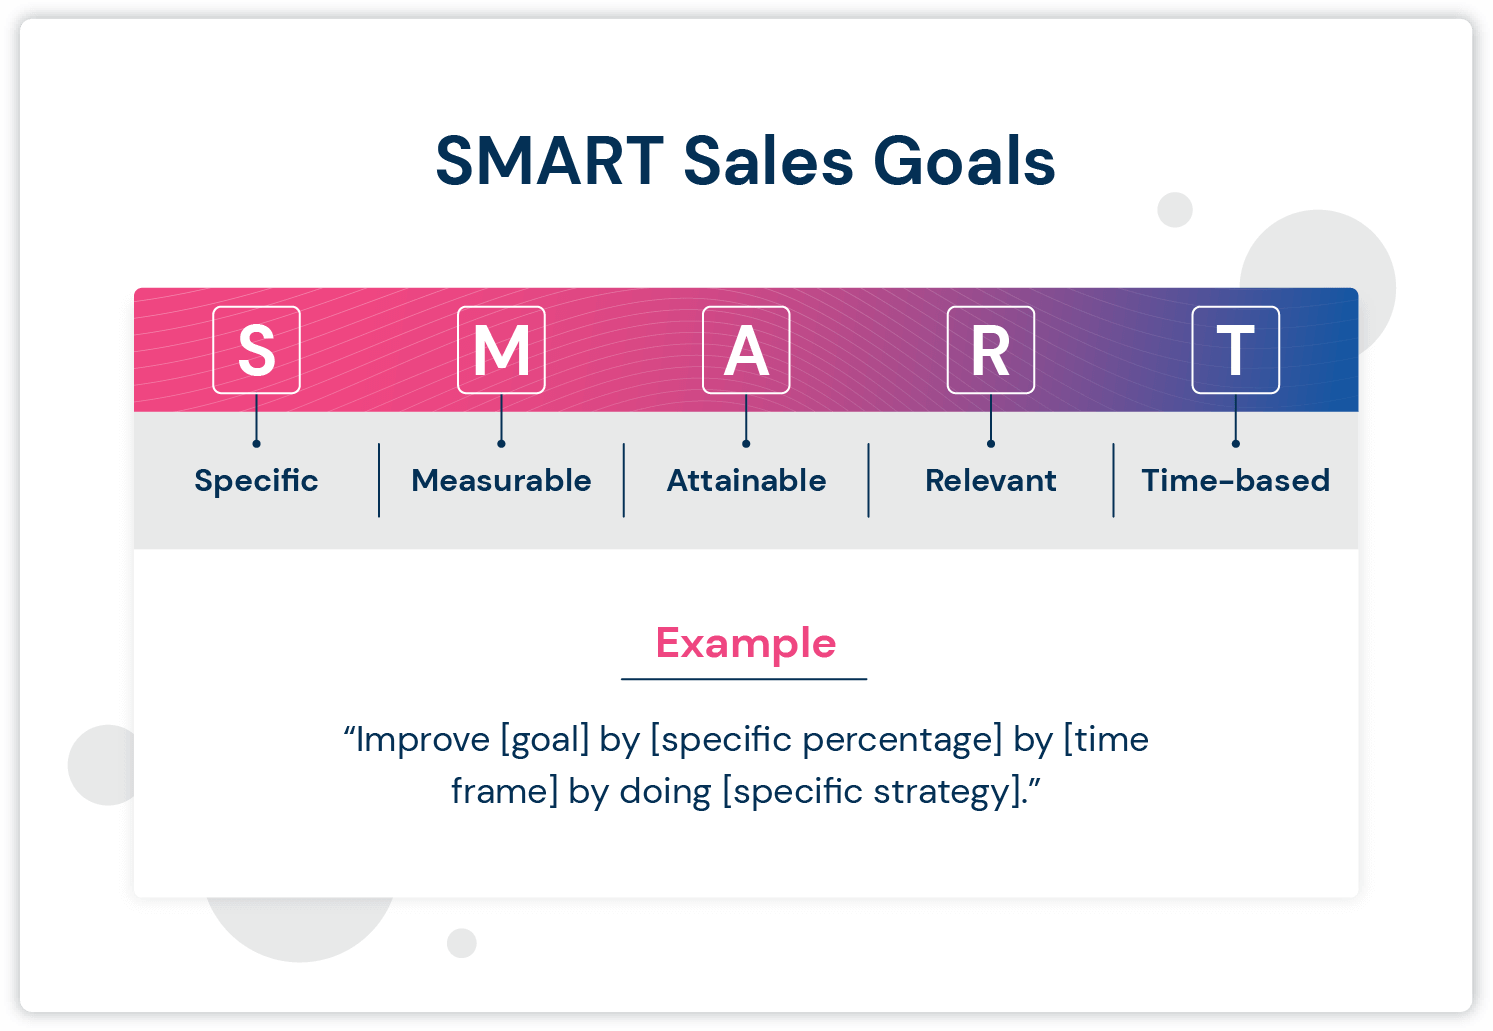 Graphic showing SMART (Specific, measurable, attainable, relevant, and time-based) goals on an ombre timeline from pink to blue. 